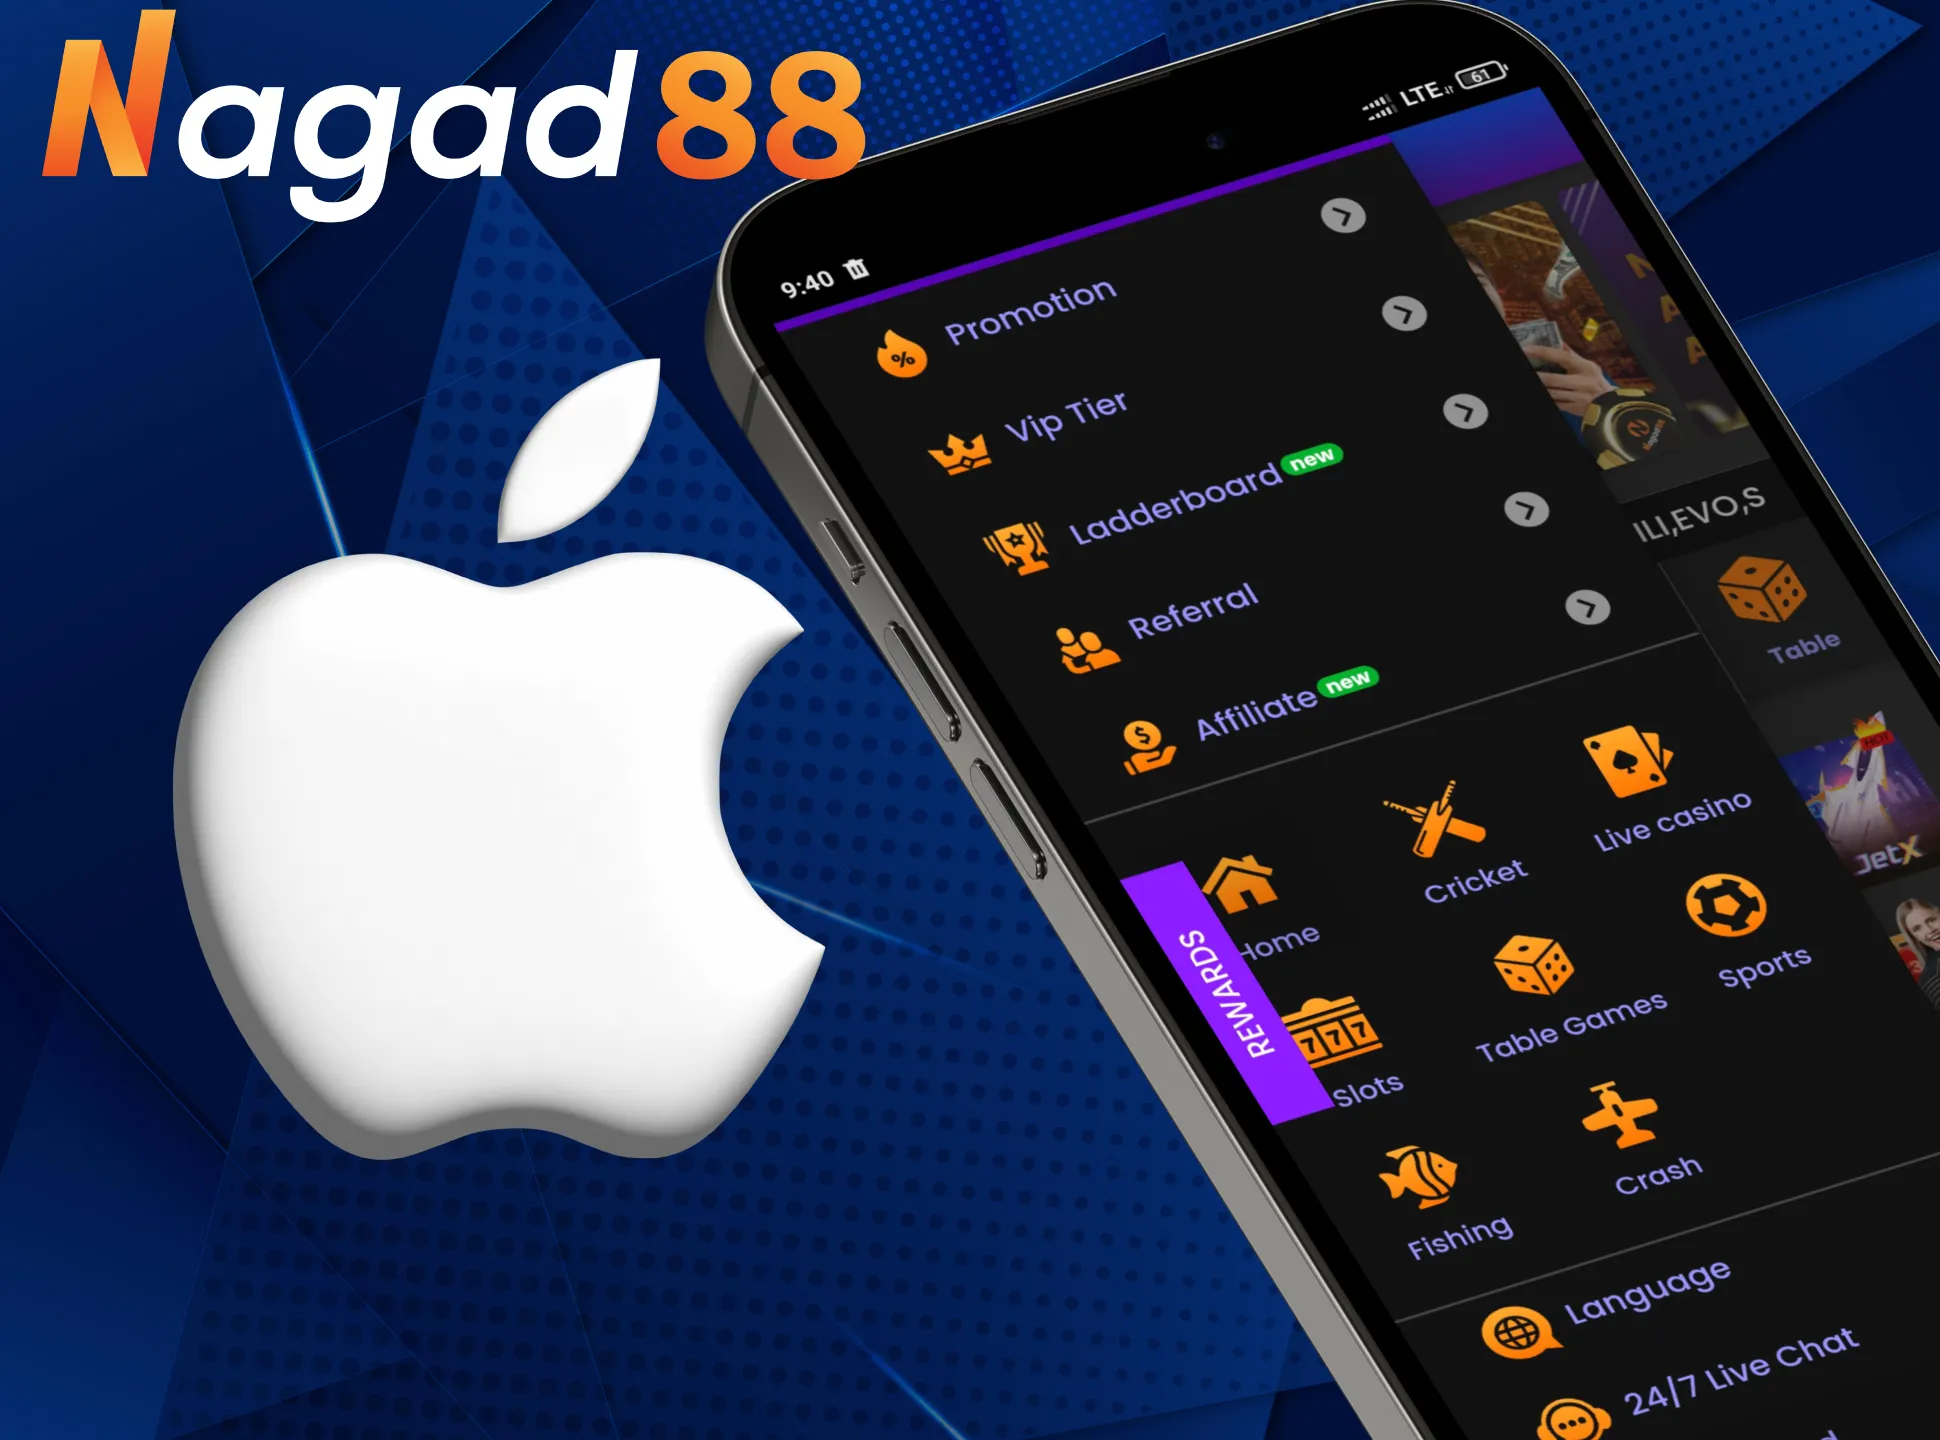 Install the Nagad88 app, it is available for iOS users.